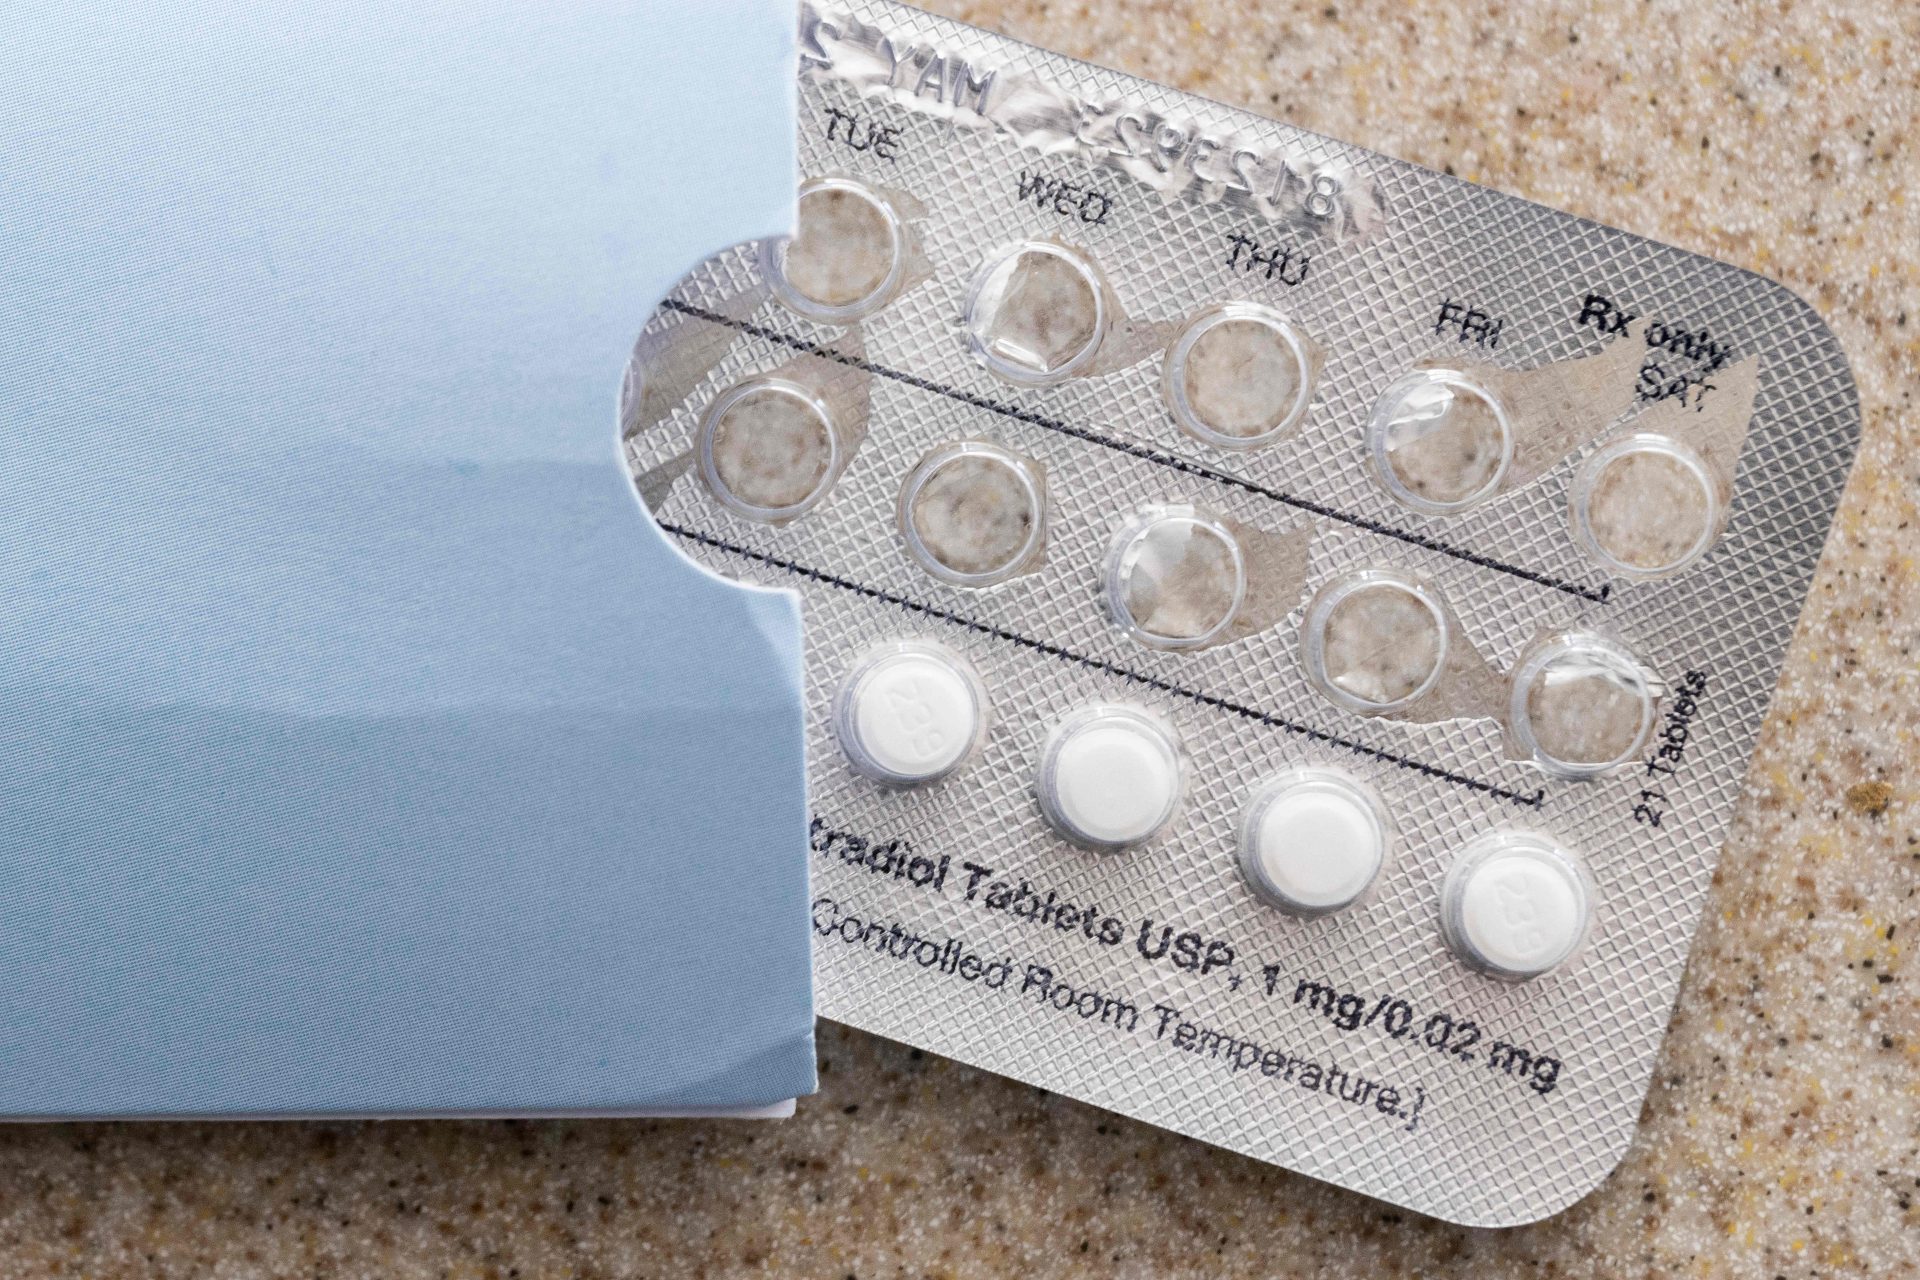 Food And Drug Administration Receives First-Ever Application For Over-The-Counter Birth Control Pills